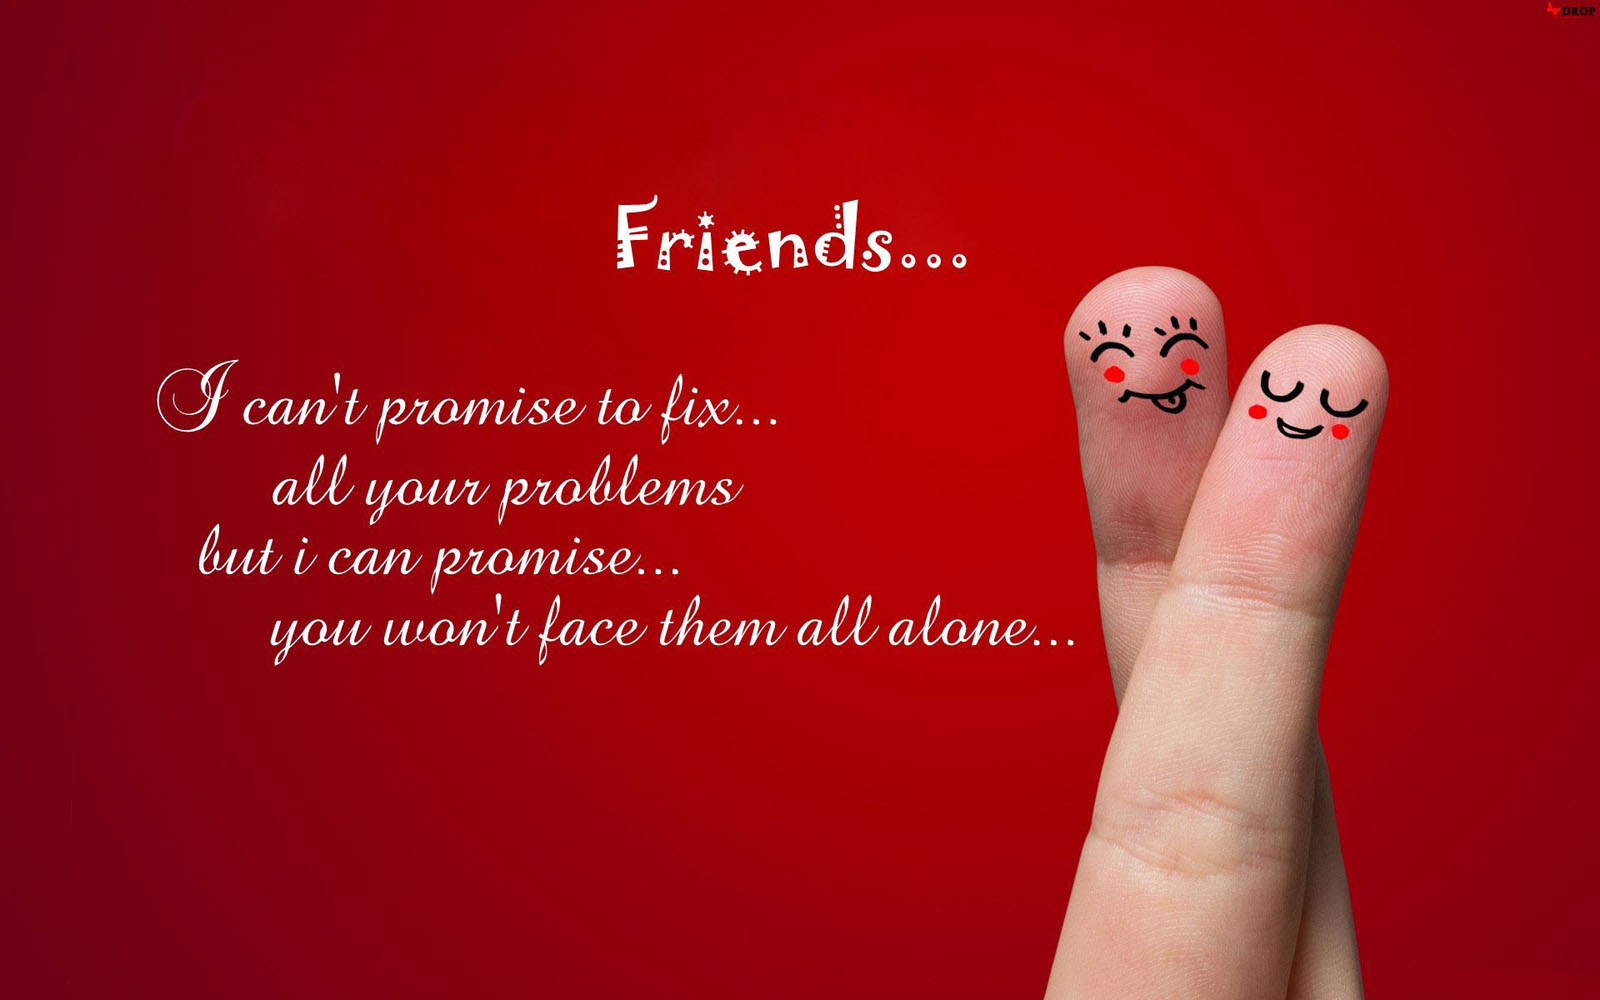 friendship day wallpapers